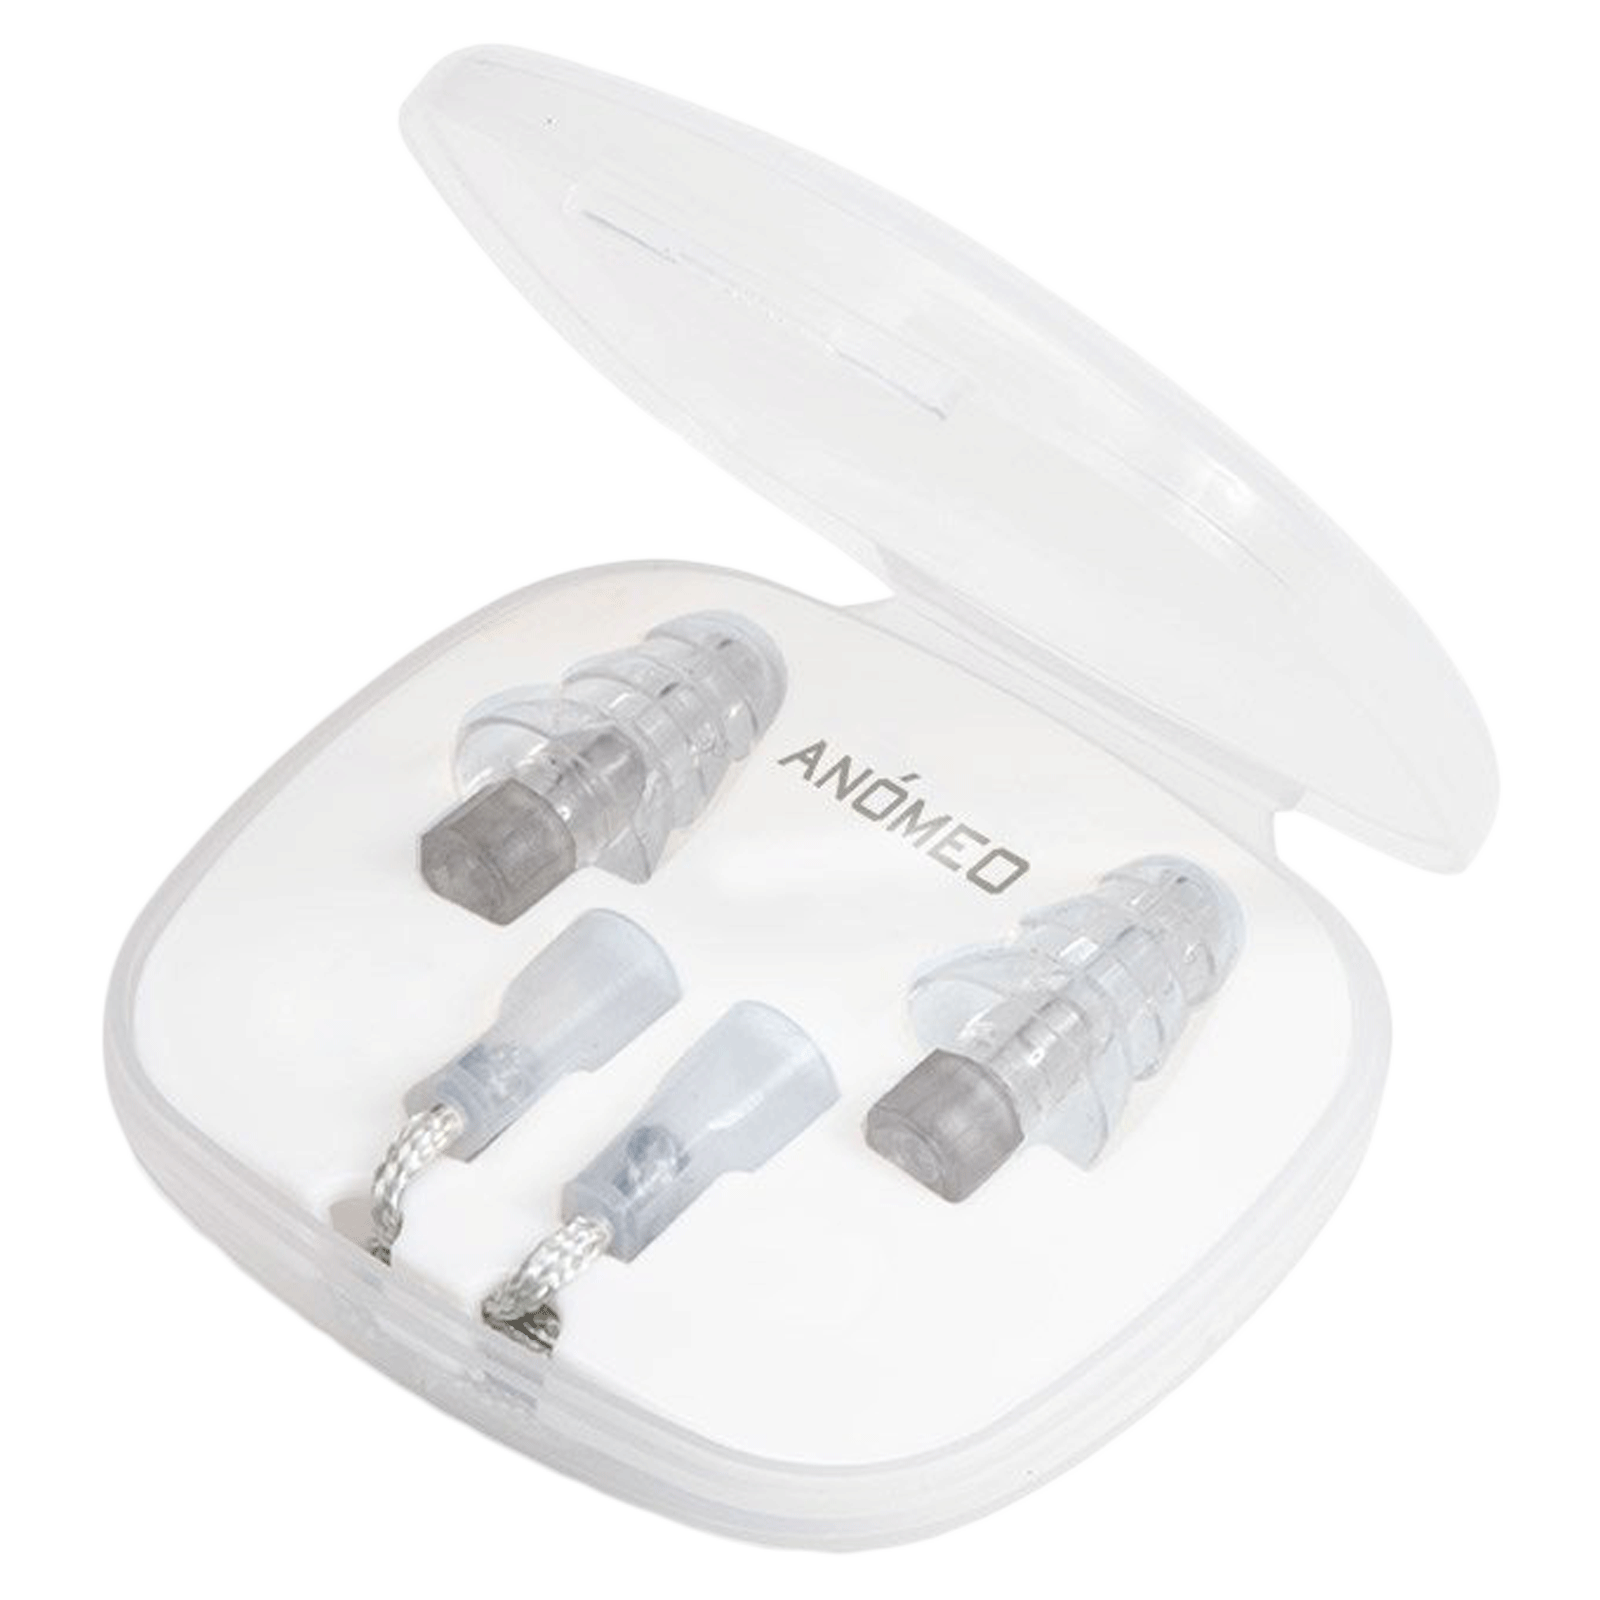 ANOMEO Sleep Silicone and Polypropylene Earplugs (Special Filter to Reduce Loud Noise, 2425, Grey)